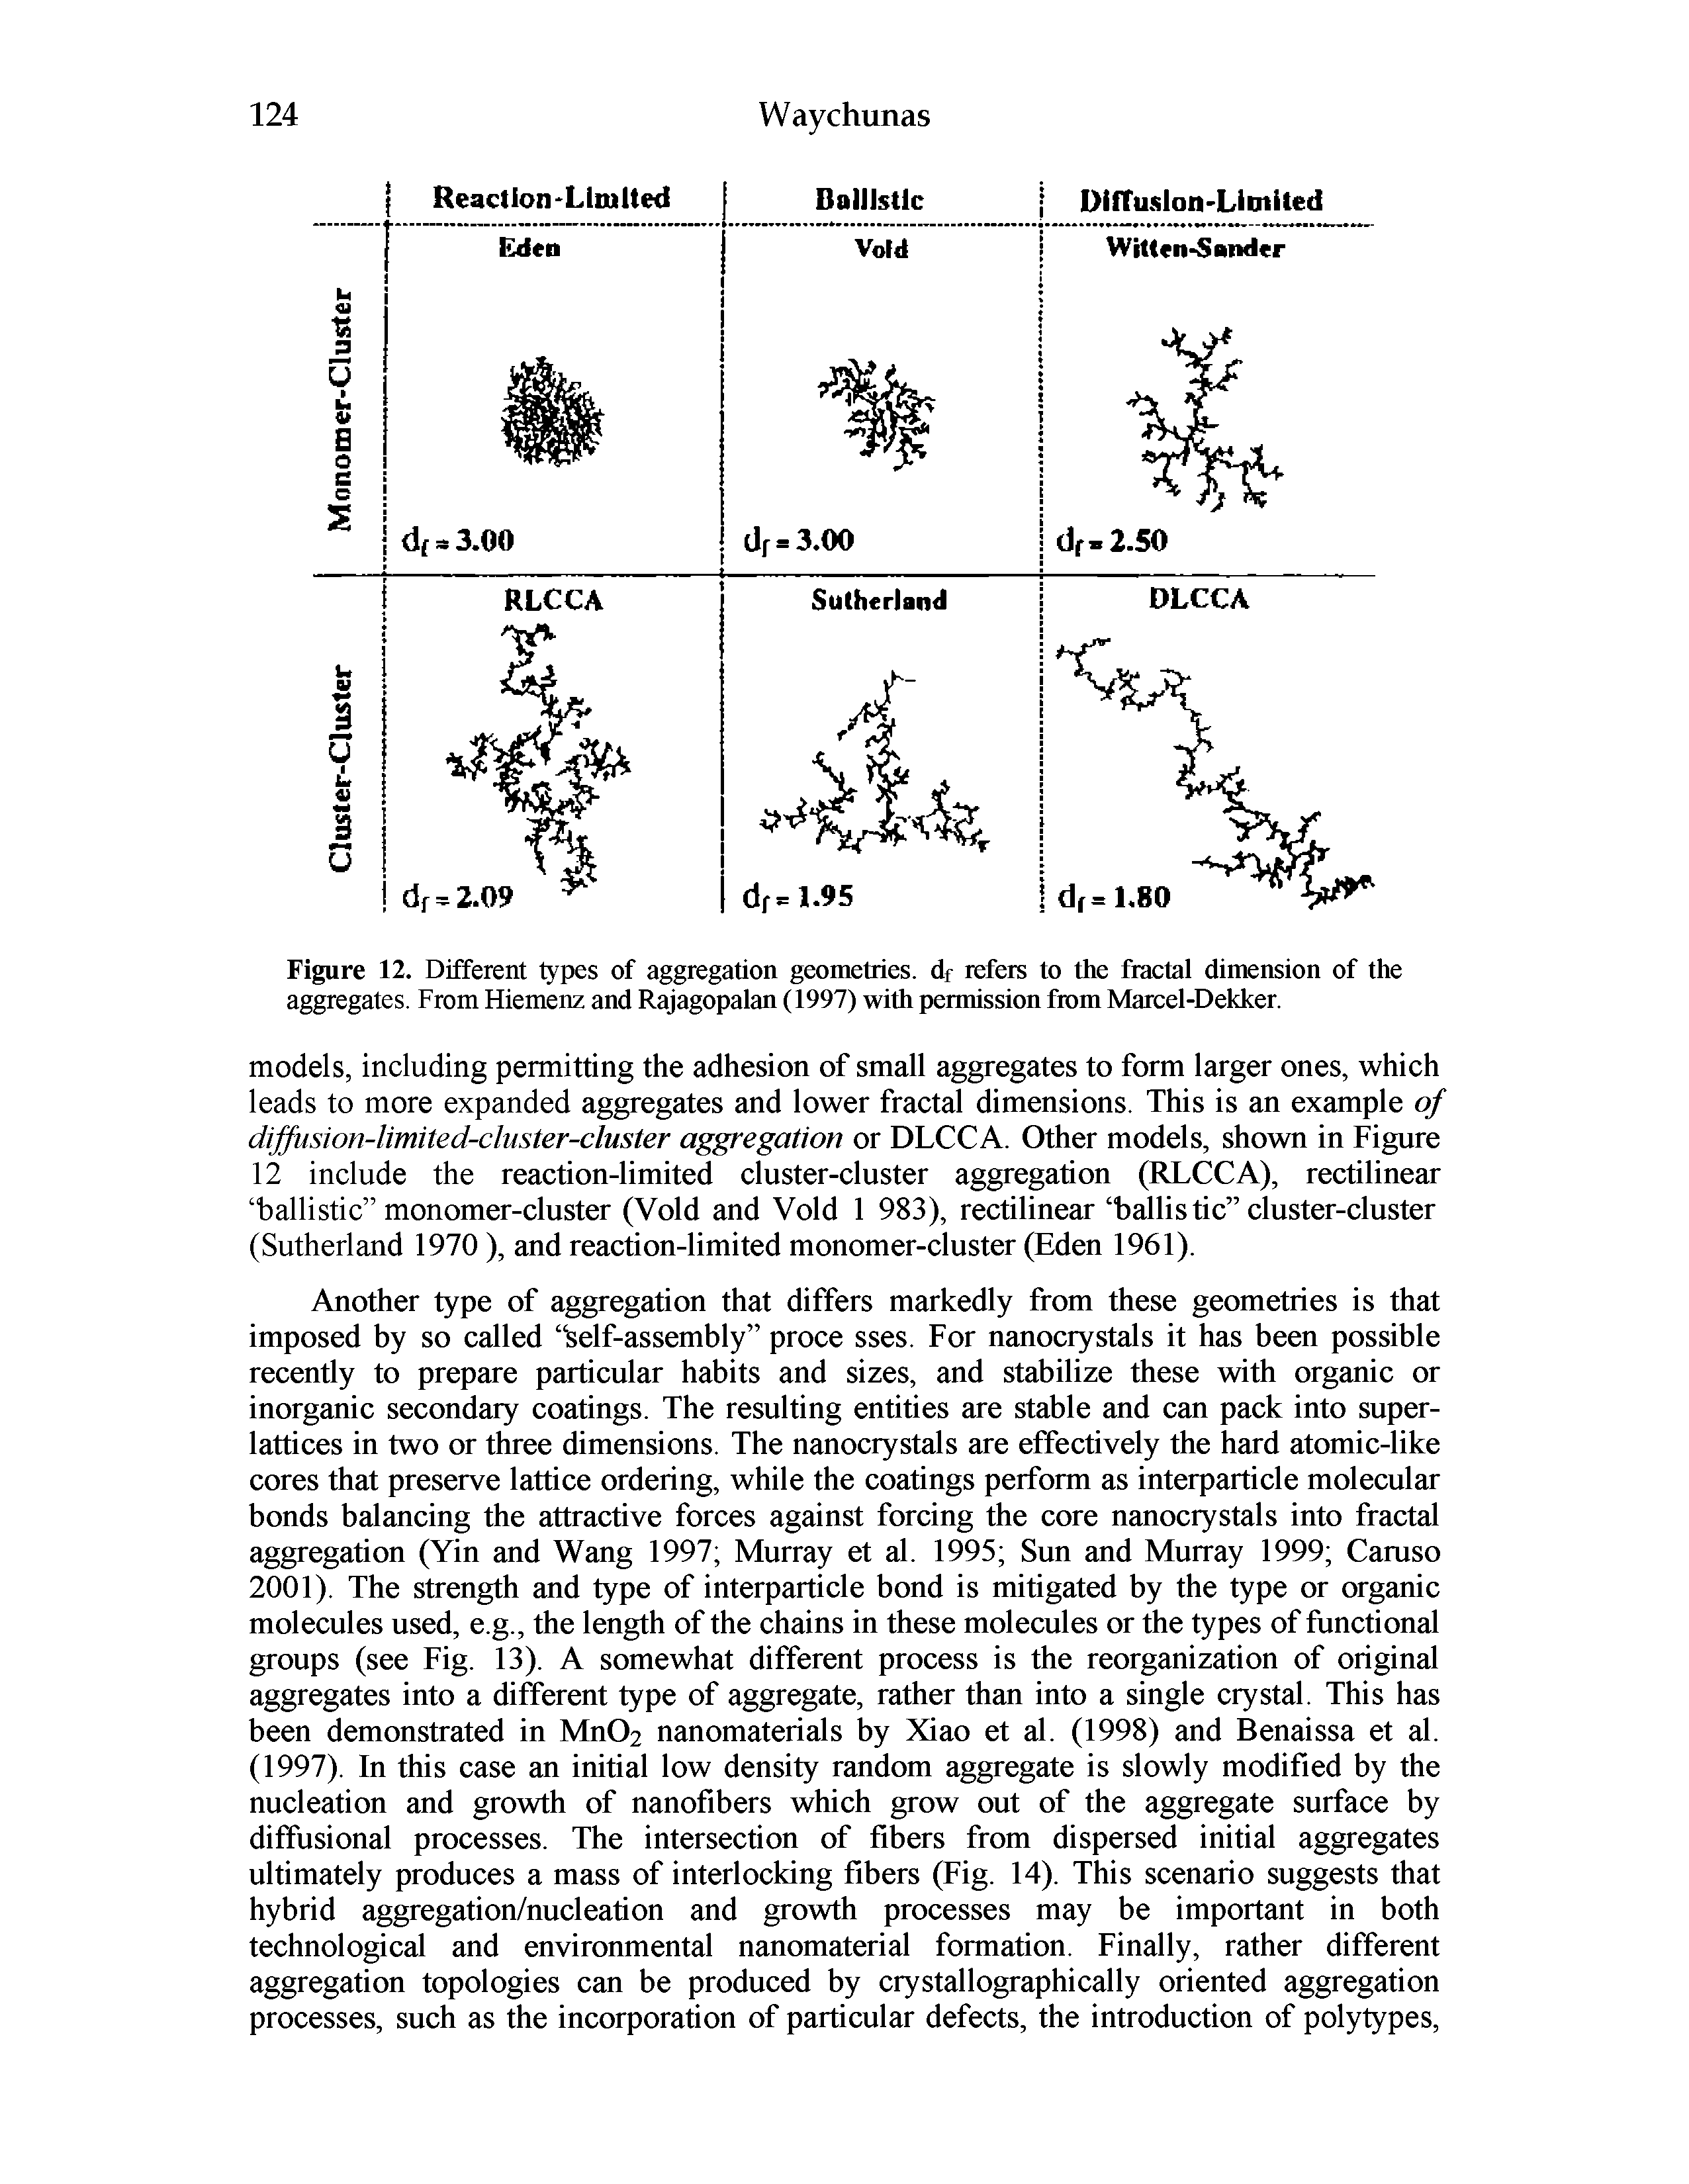 Figure 12. Different types of aggregation geometries, df refers to the fractal dimension of the aggregates. From Hiemenz and Rajagopalan (1997) with permission from Marcel-Dekker.